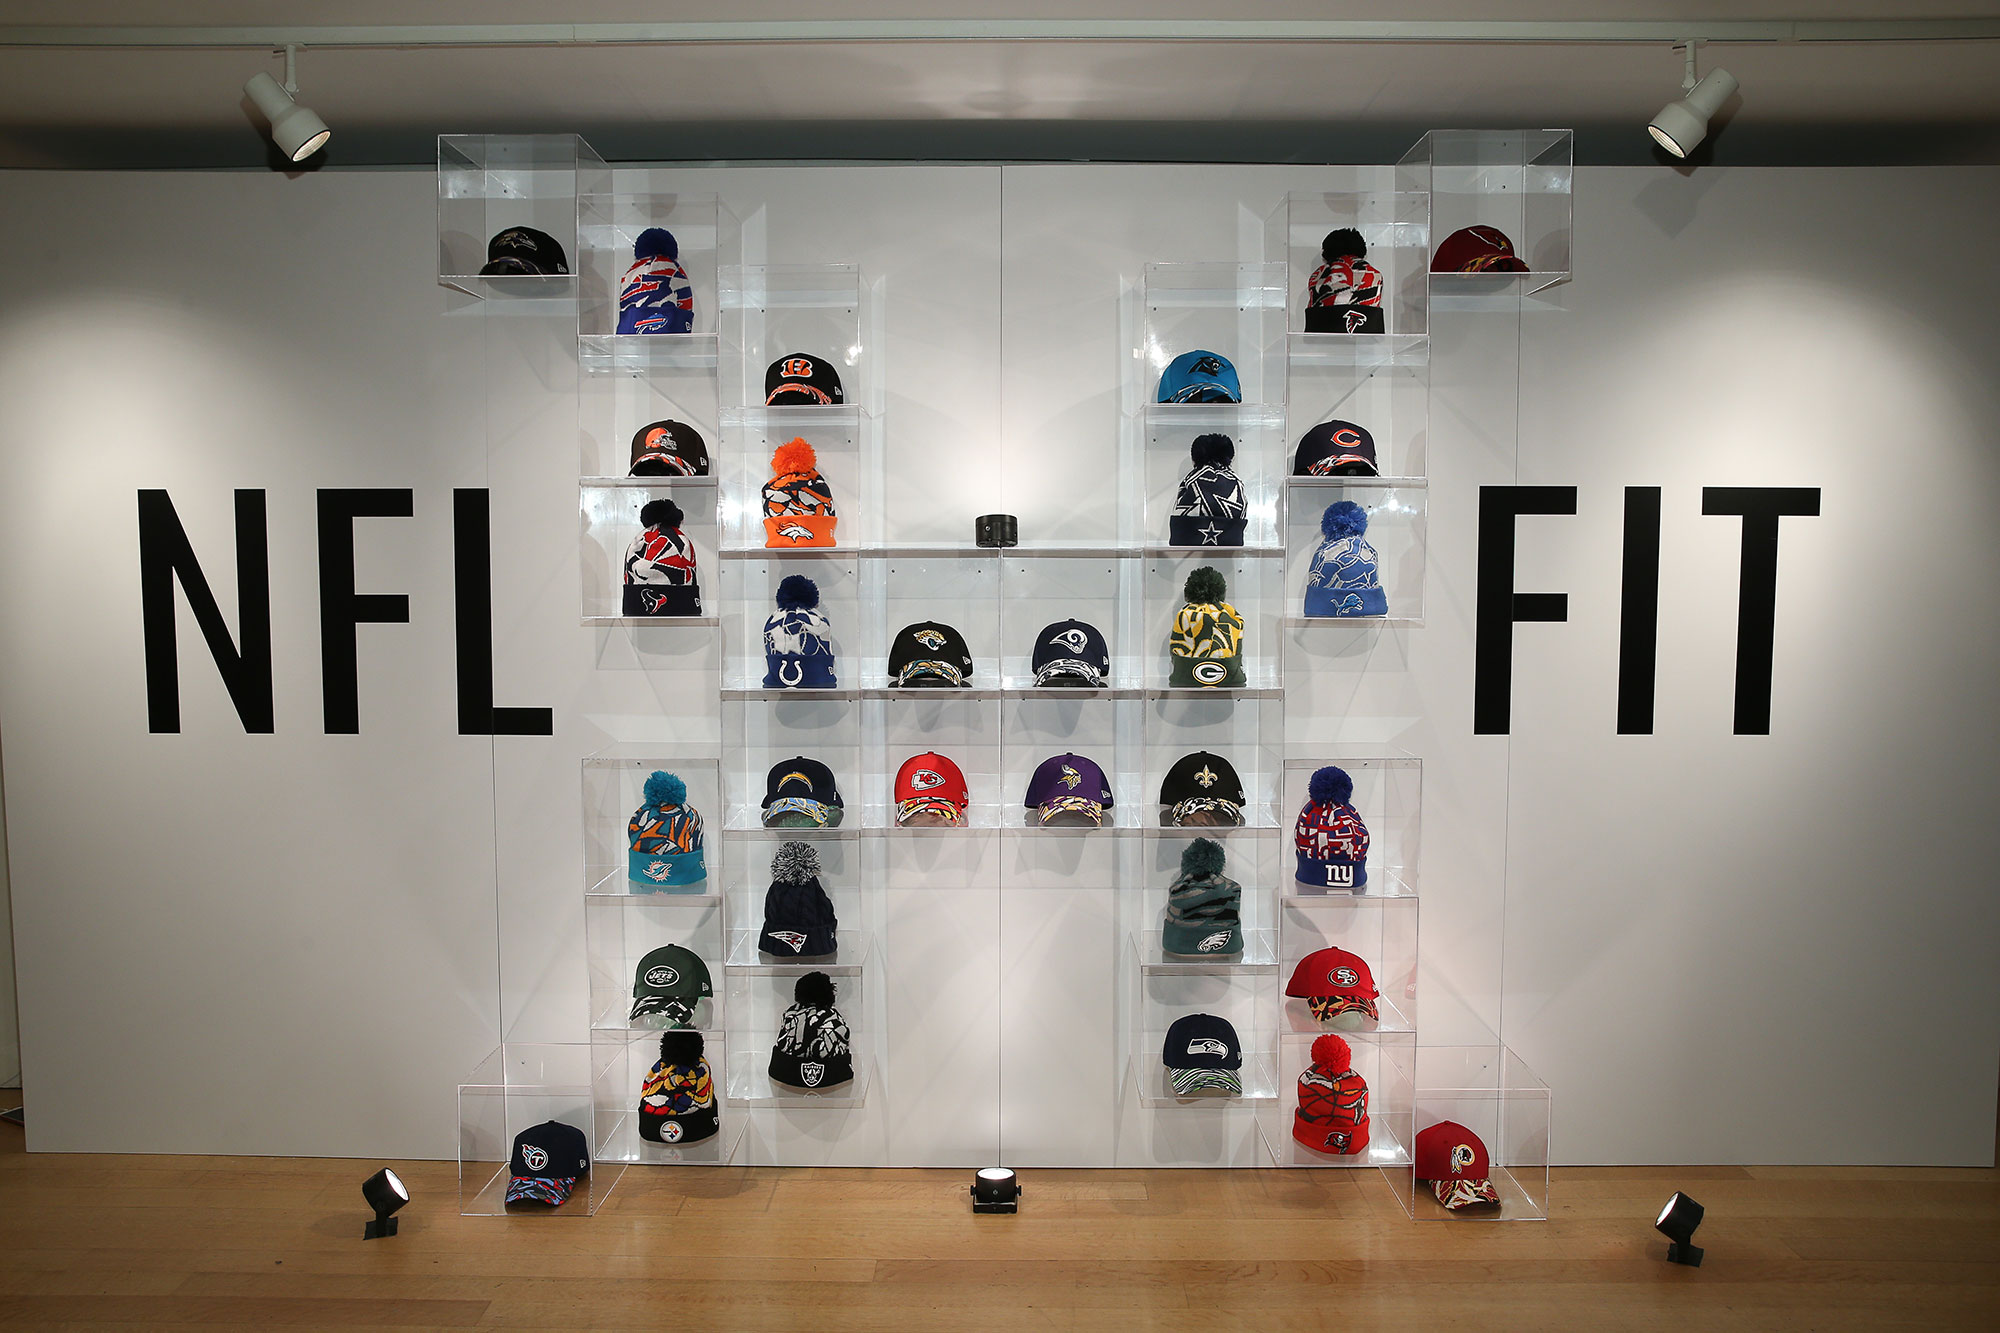 Hats of NFL teams set up in cases making an X to form NFL xFIT display.